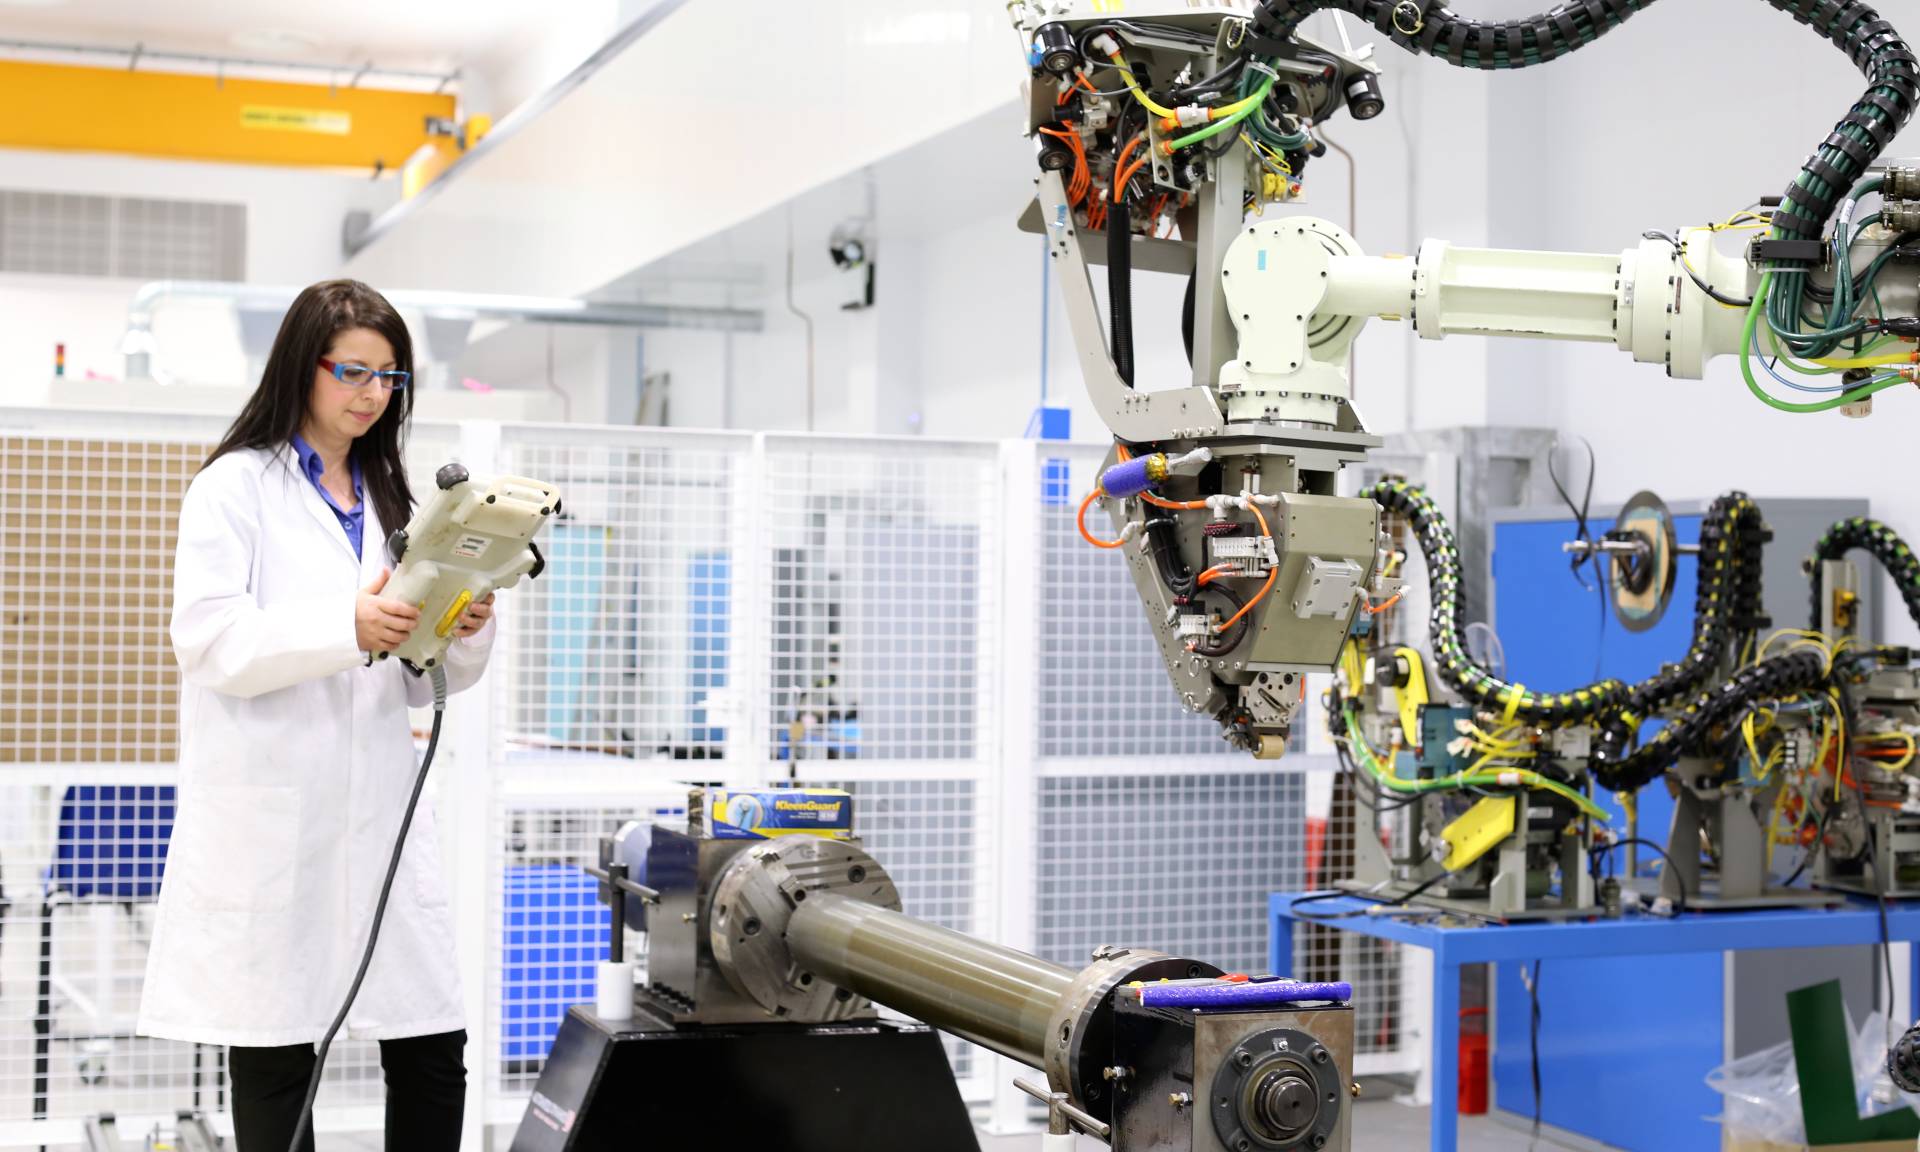 Manufacturing a new safety culture at the AMRC University of Sheffield